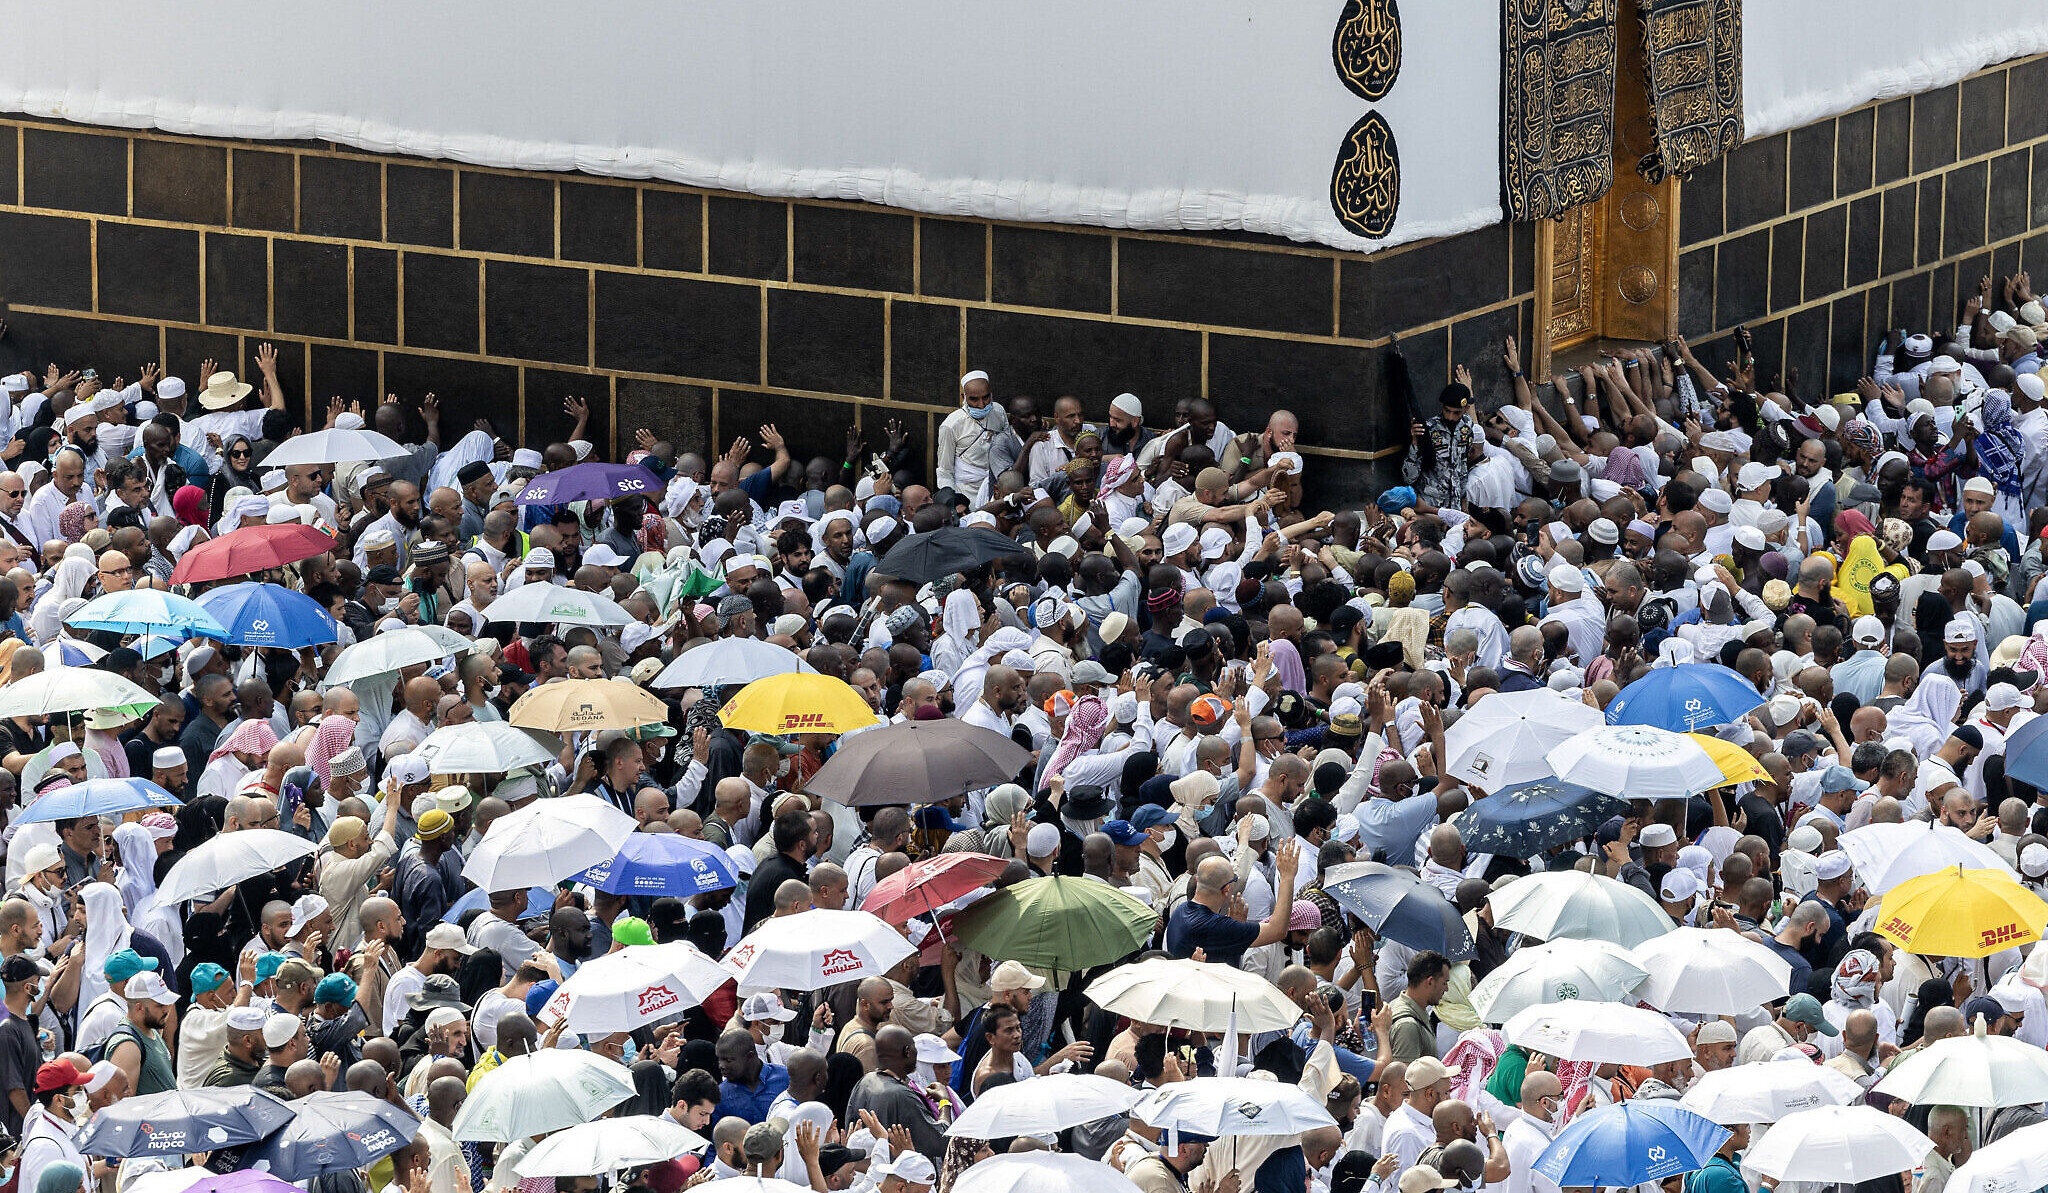 577 people died during pilgrimage to Mecca